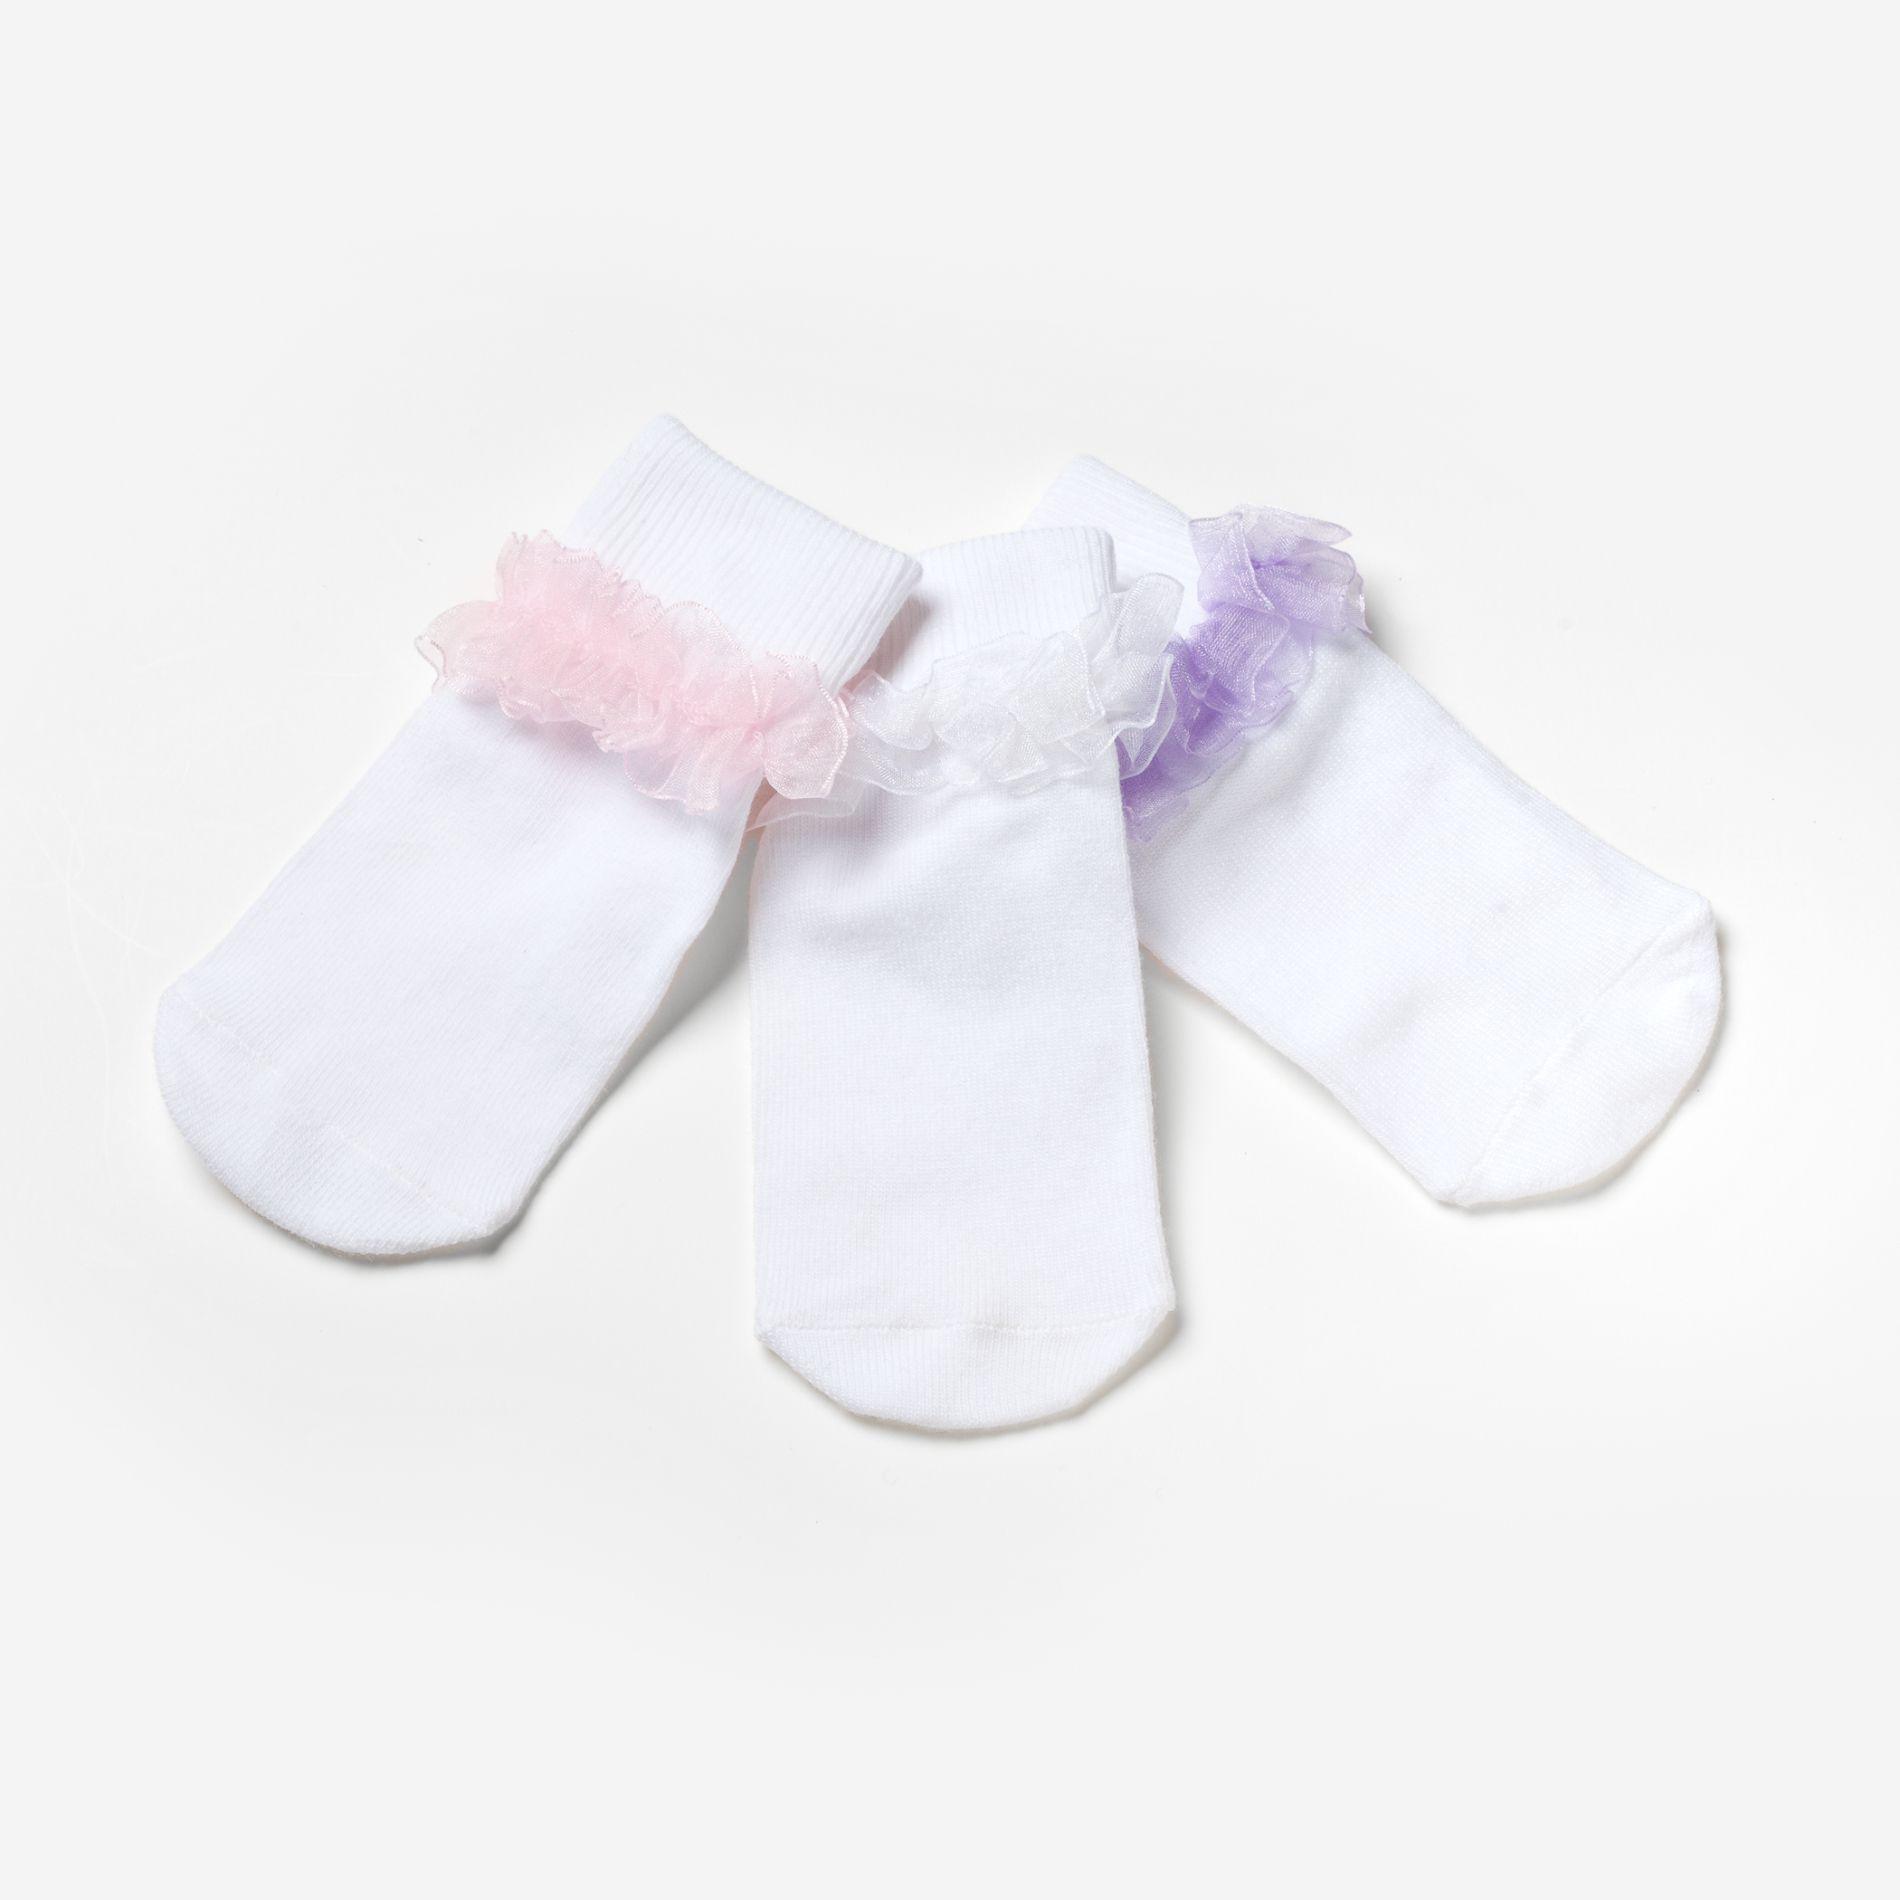 WonderKids Girl's 3 Pair Basic Socks with Lace Turn cuff